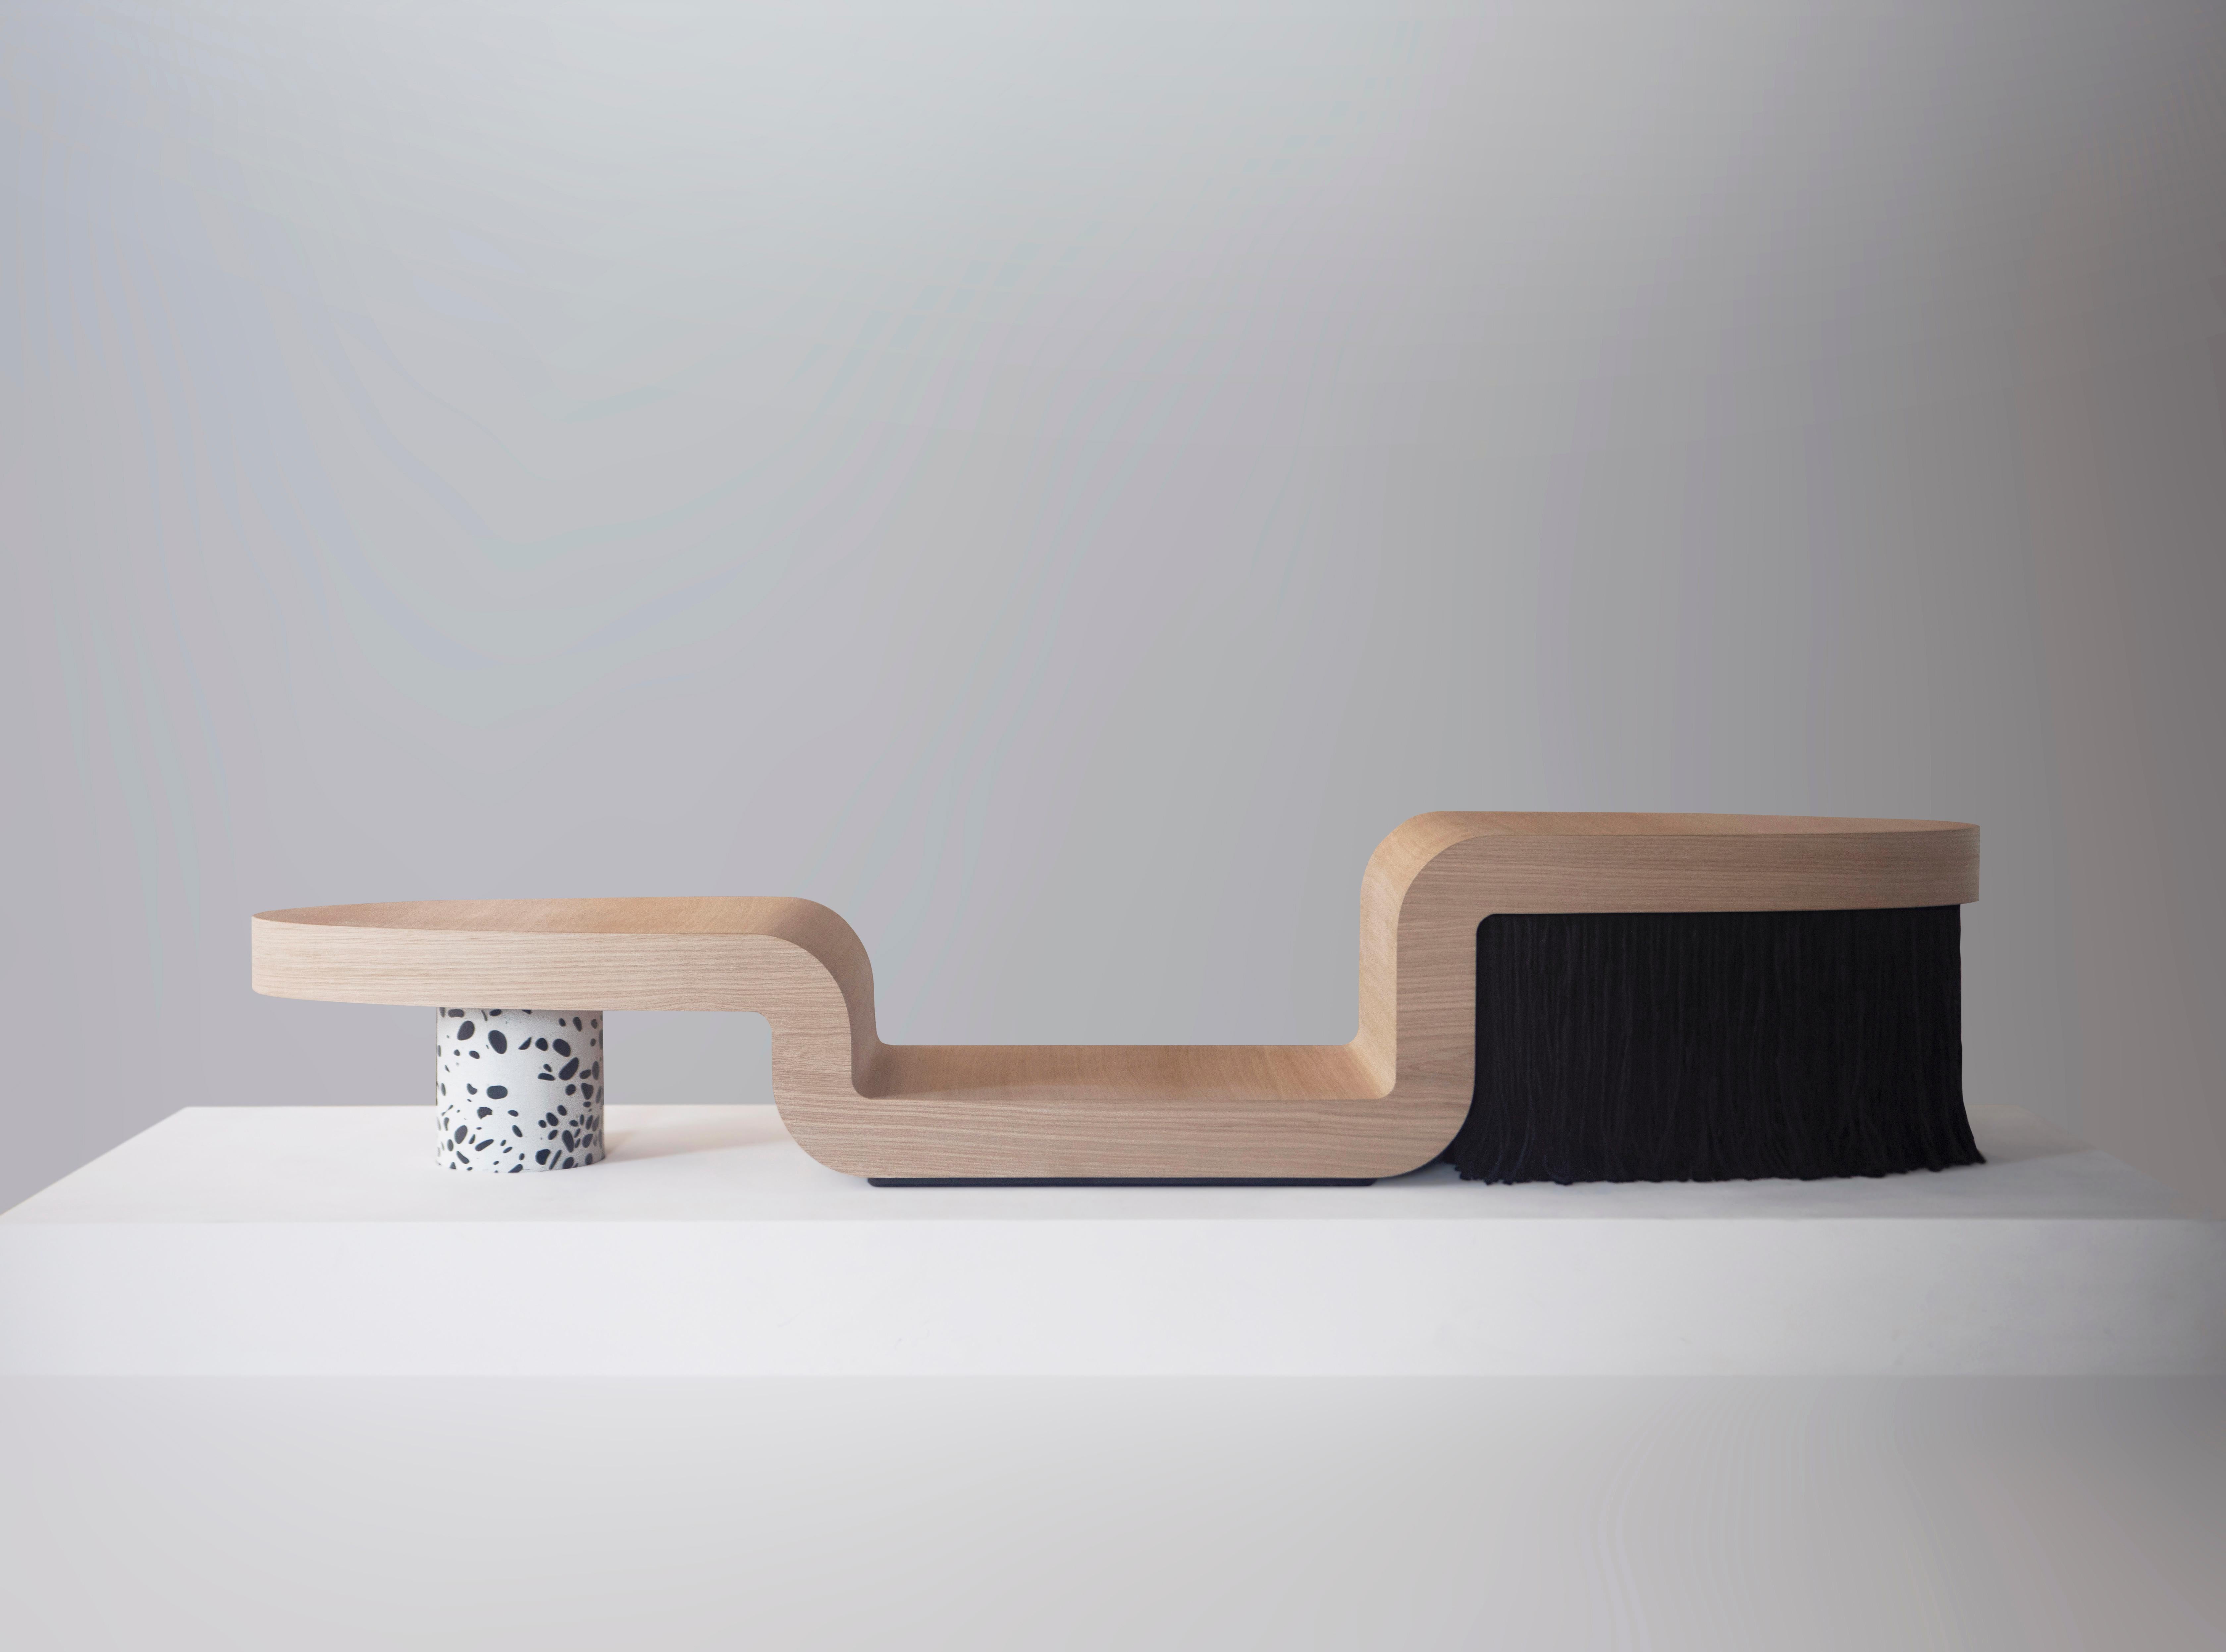 Product designer Mat Driscoll and interior design firm Ishka Designs collaborated for the first time on this piece for TIMBER! The Family bench is a sculptural form embracing furniture as art and is made of hand-finished oak, terrazzo, cotton,